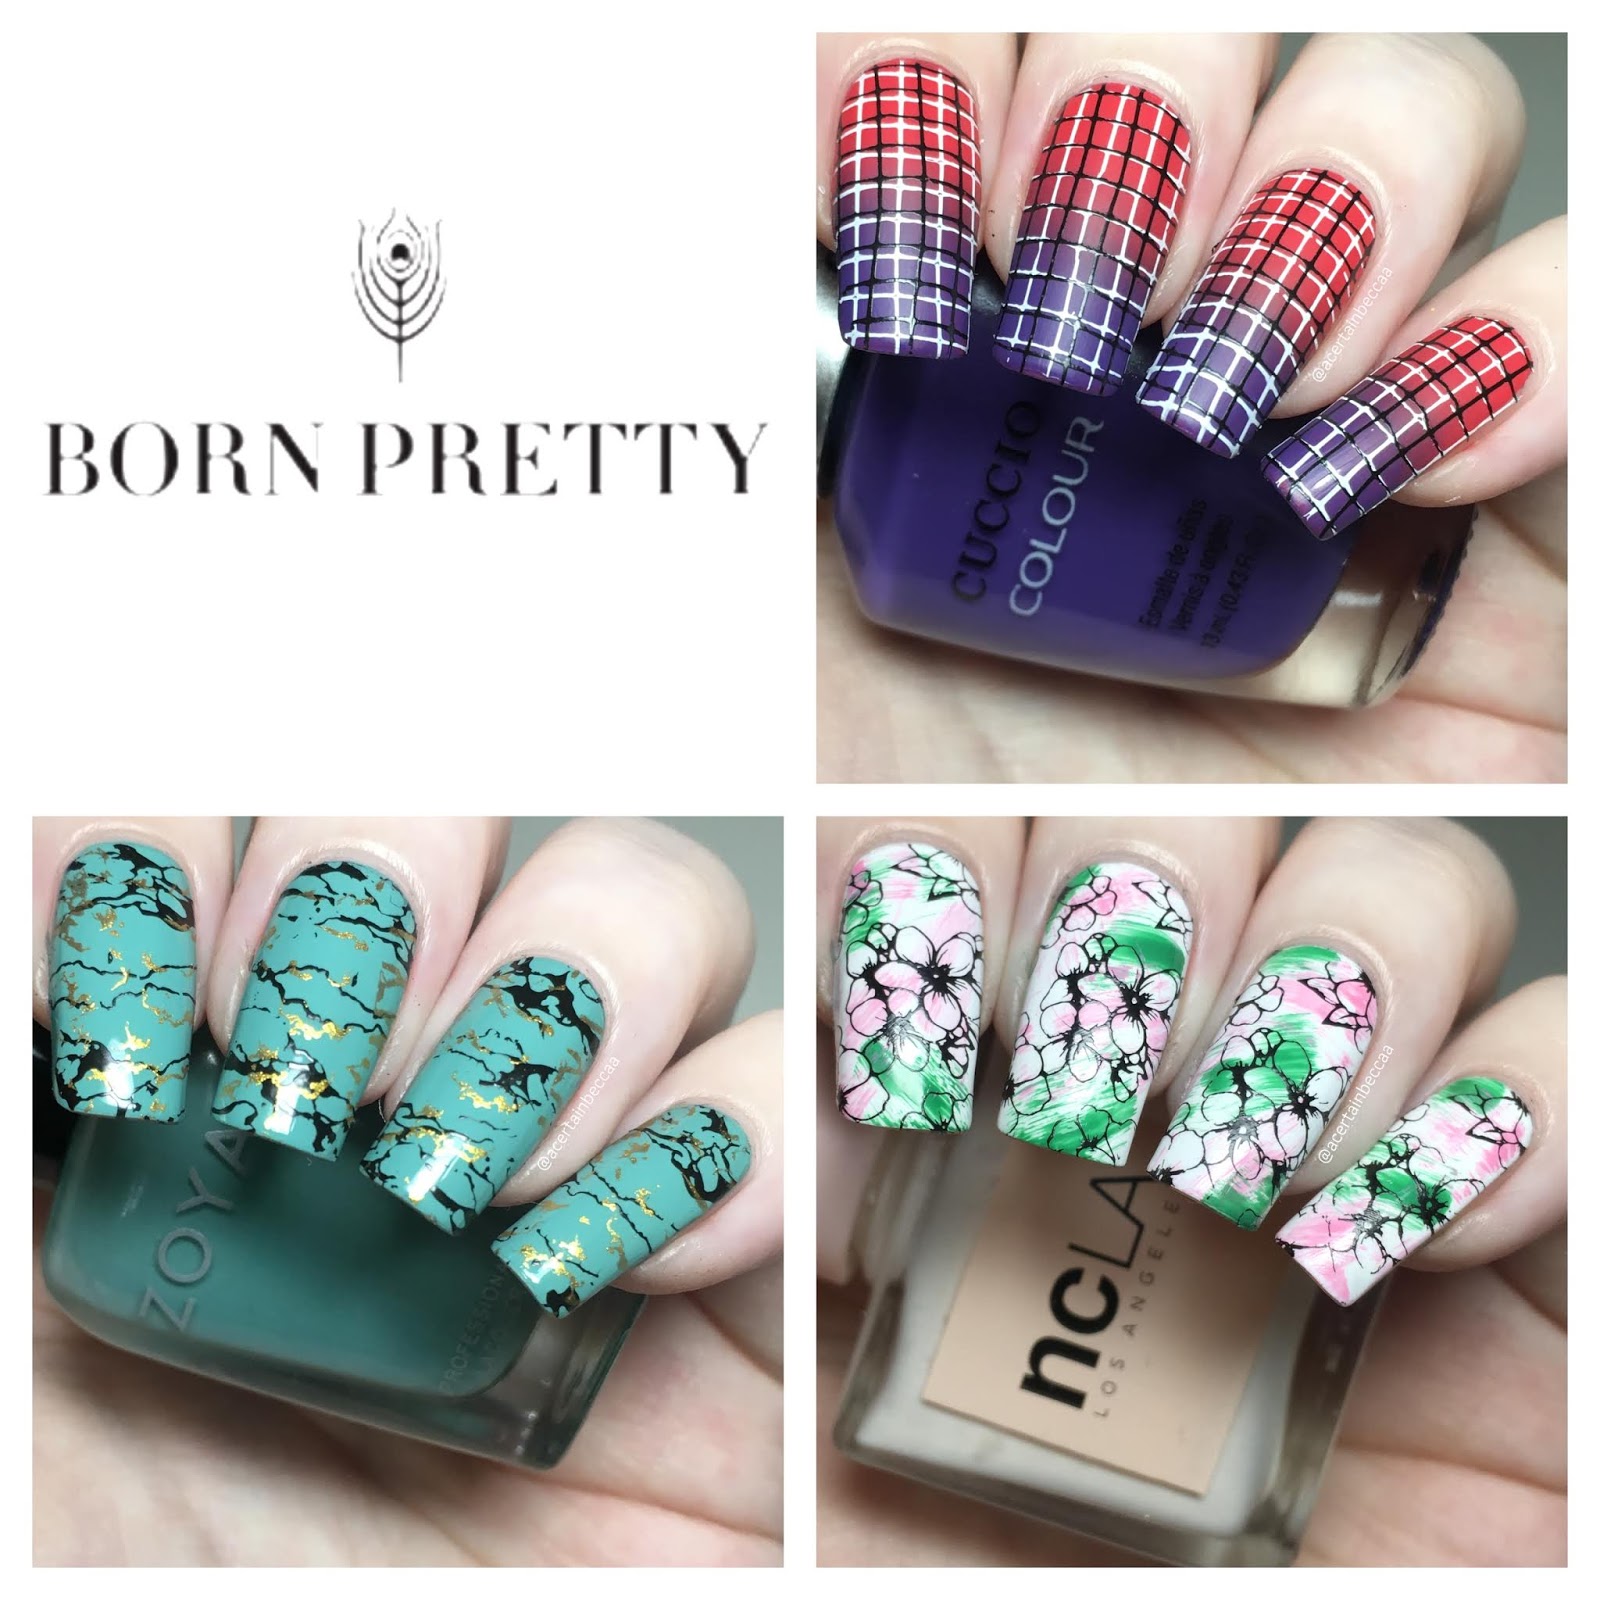 Spookfest Day 28: Princess Fairy Nails with Nail Art - All Things Beautiful  XO